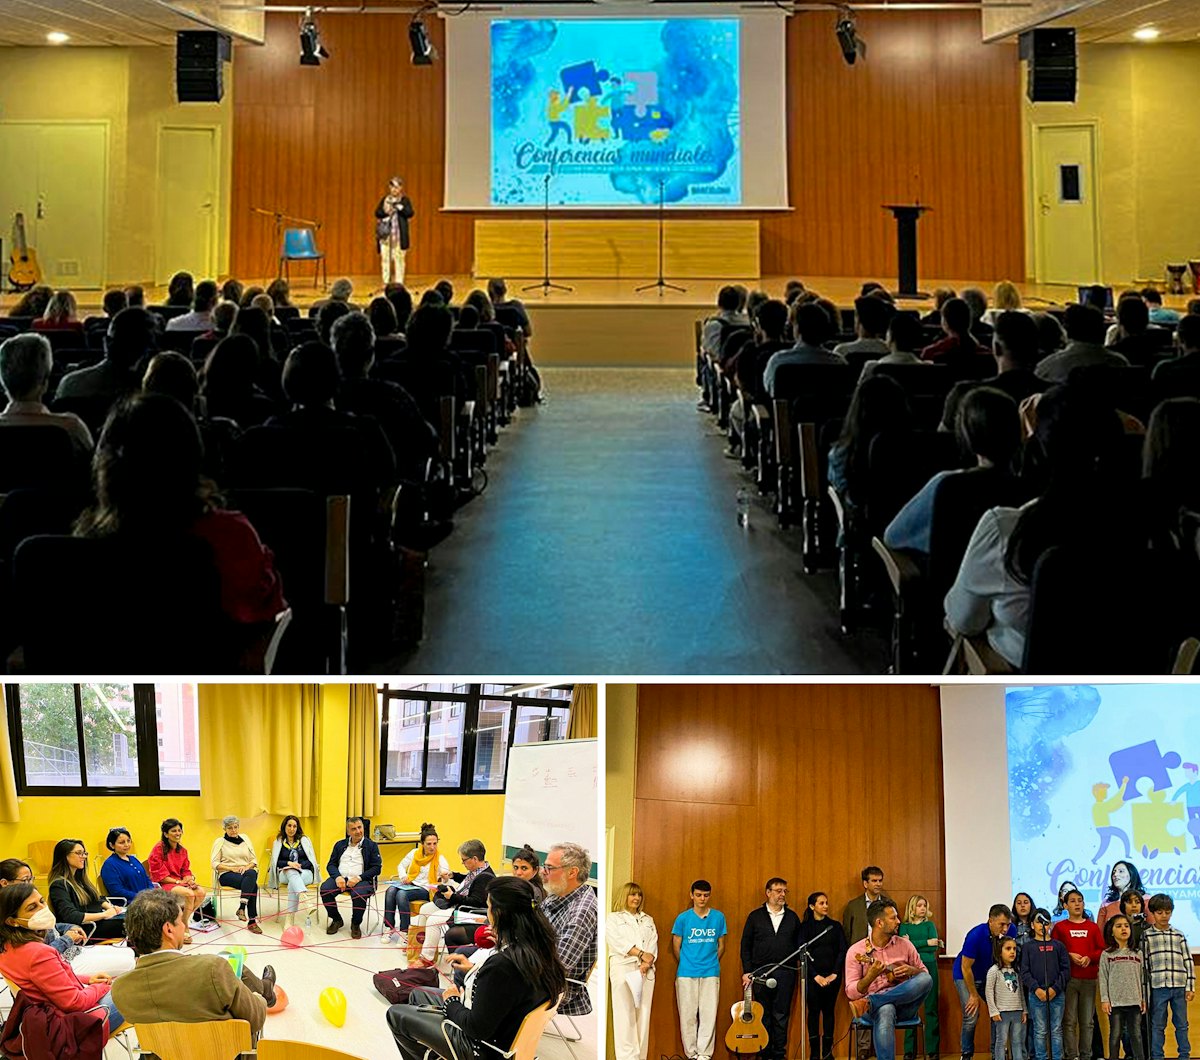 Many people gathered for this conference in Barcelona, Spain.